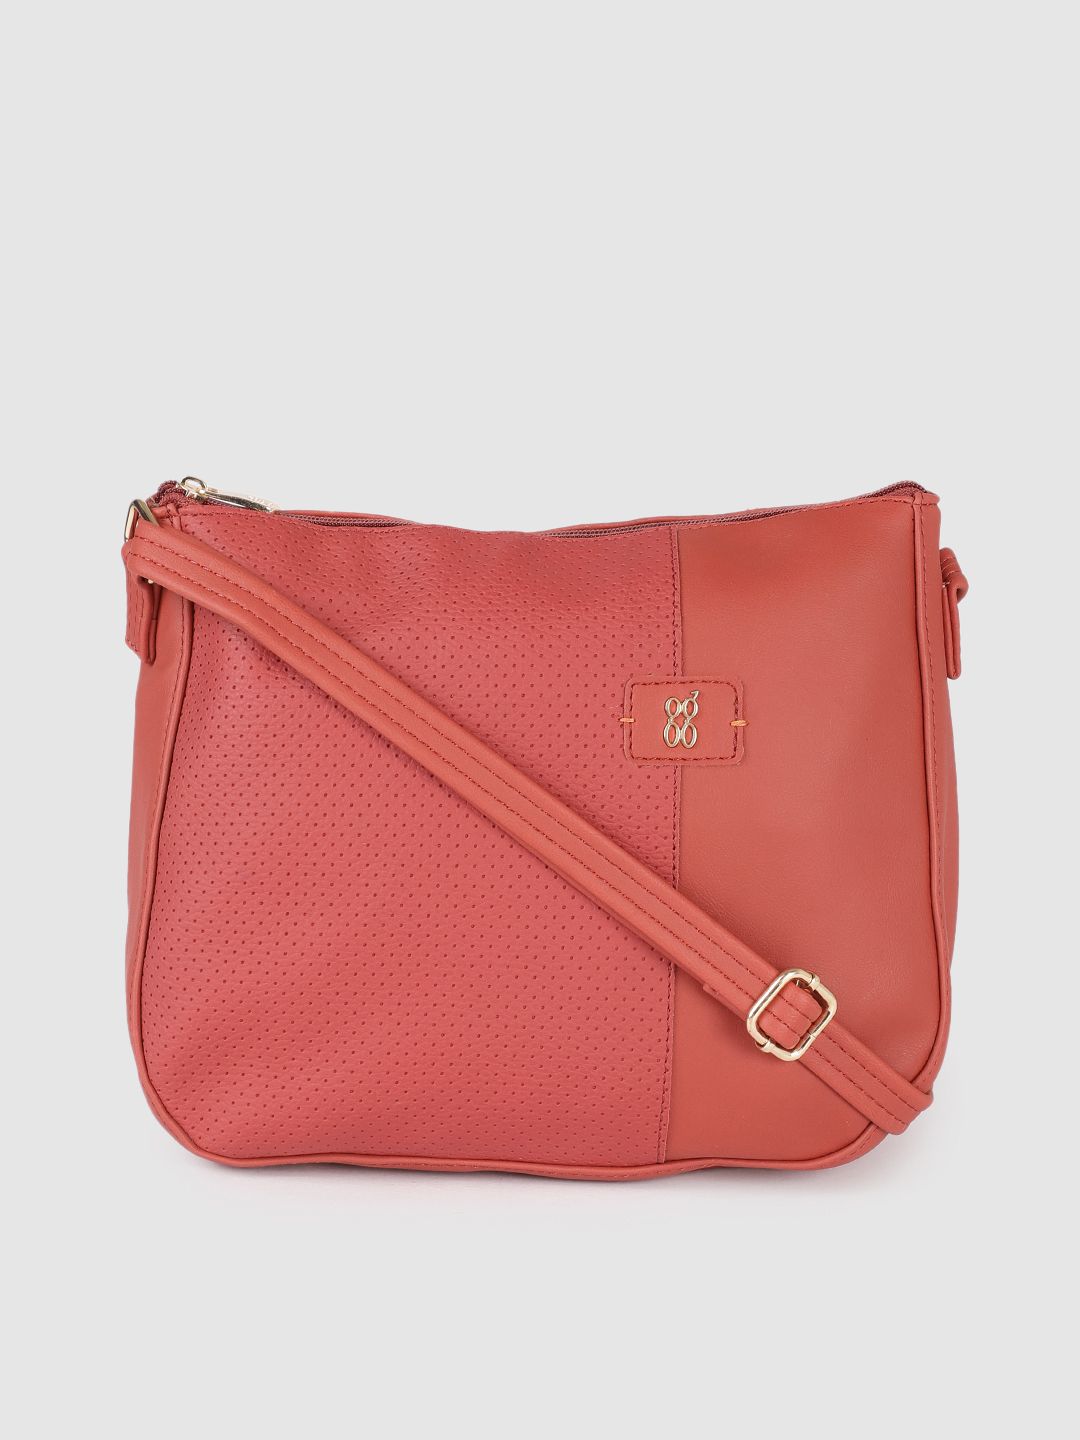 Baggit Red Textured Structured Sling Bag Price in India